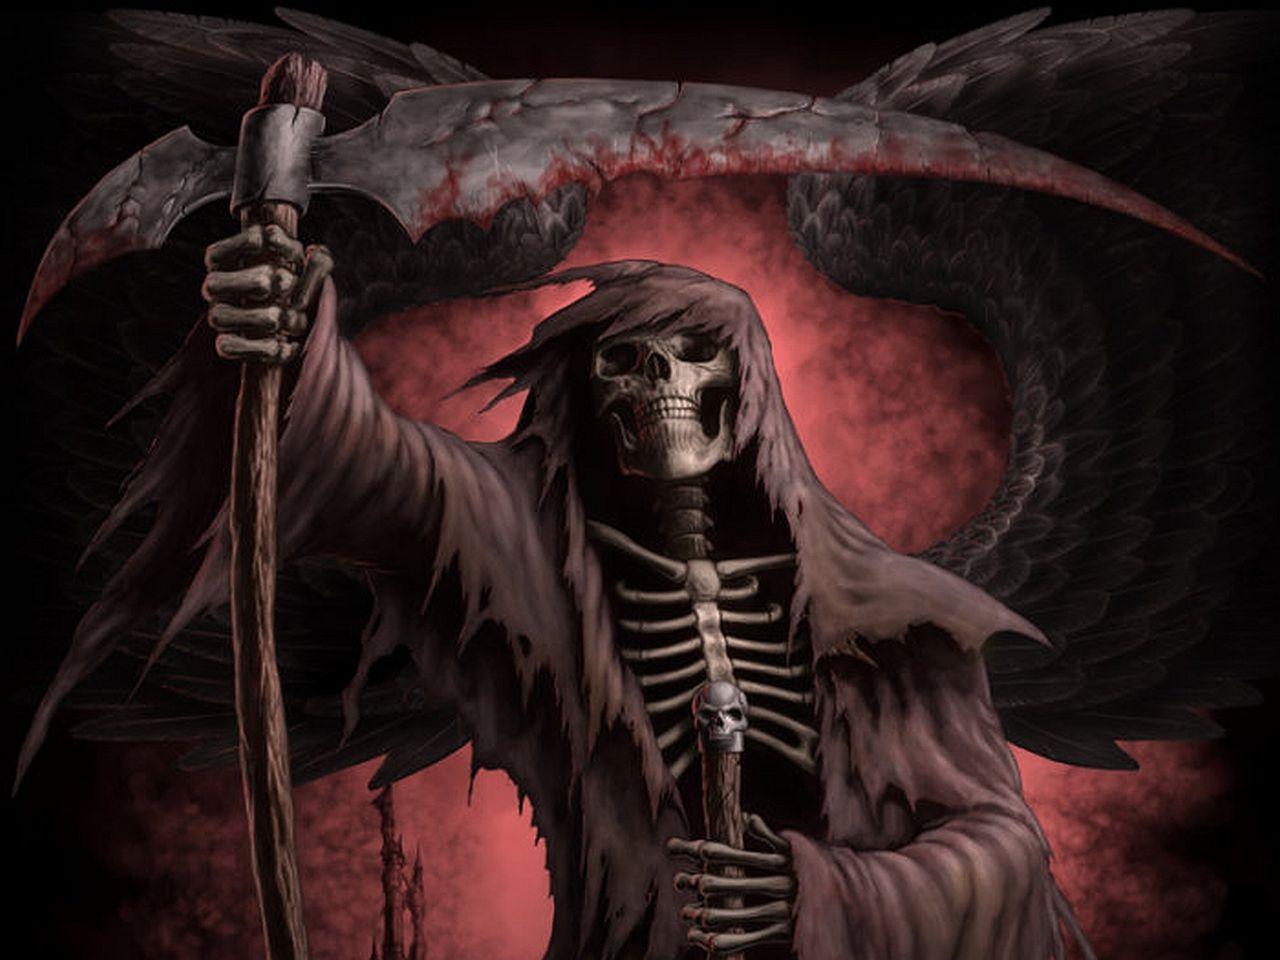 The Grim Reaper, also known by his actual name as Death, is the god